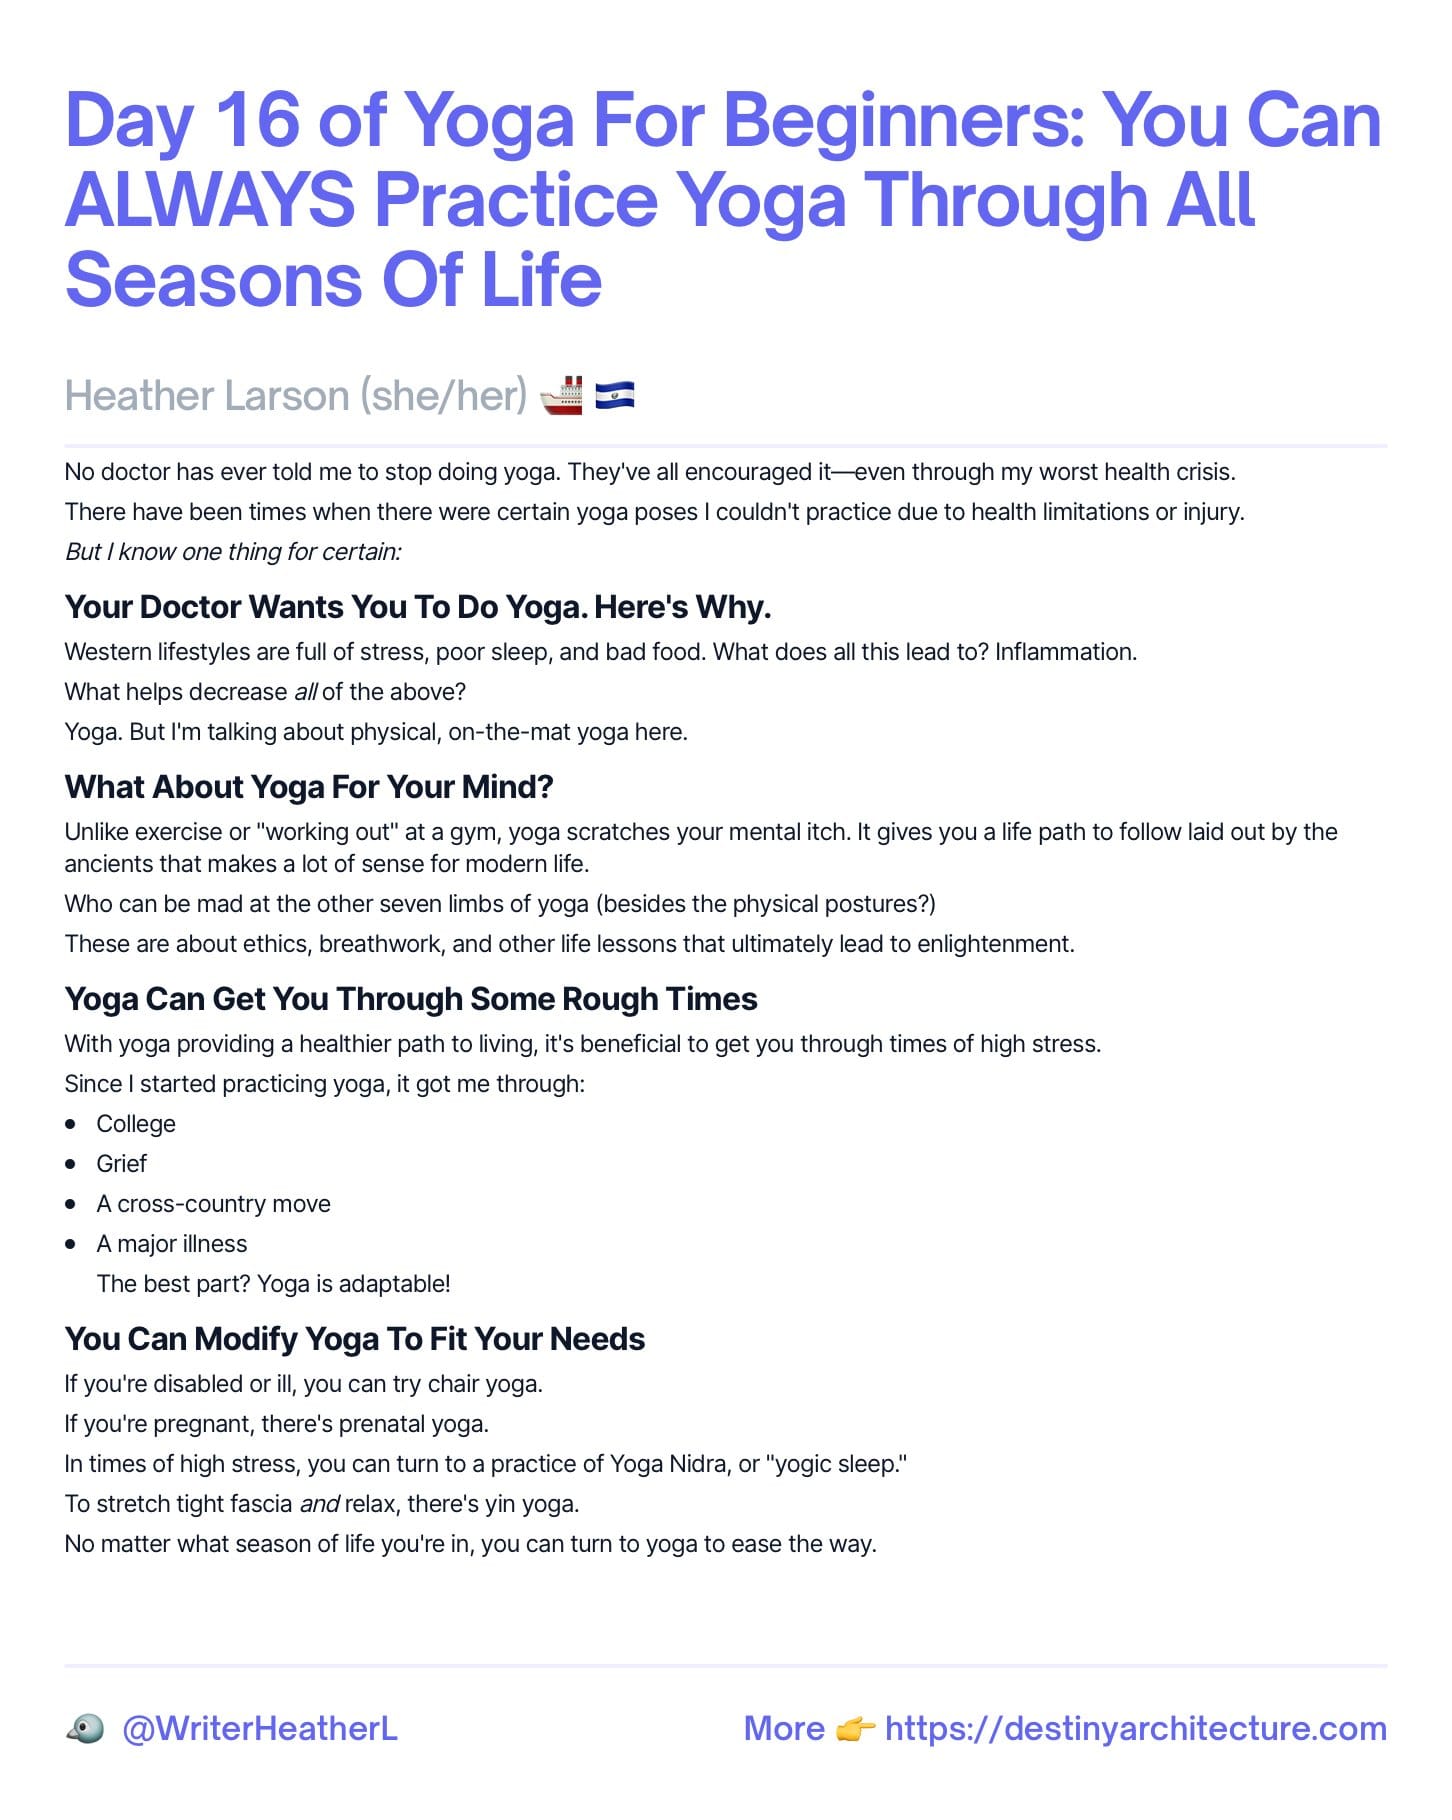 Day 16 of Yoga For Beginners: You Can ALWAYS Practice Yoga Through All Seasons Of Life